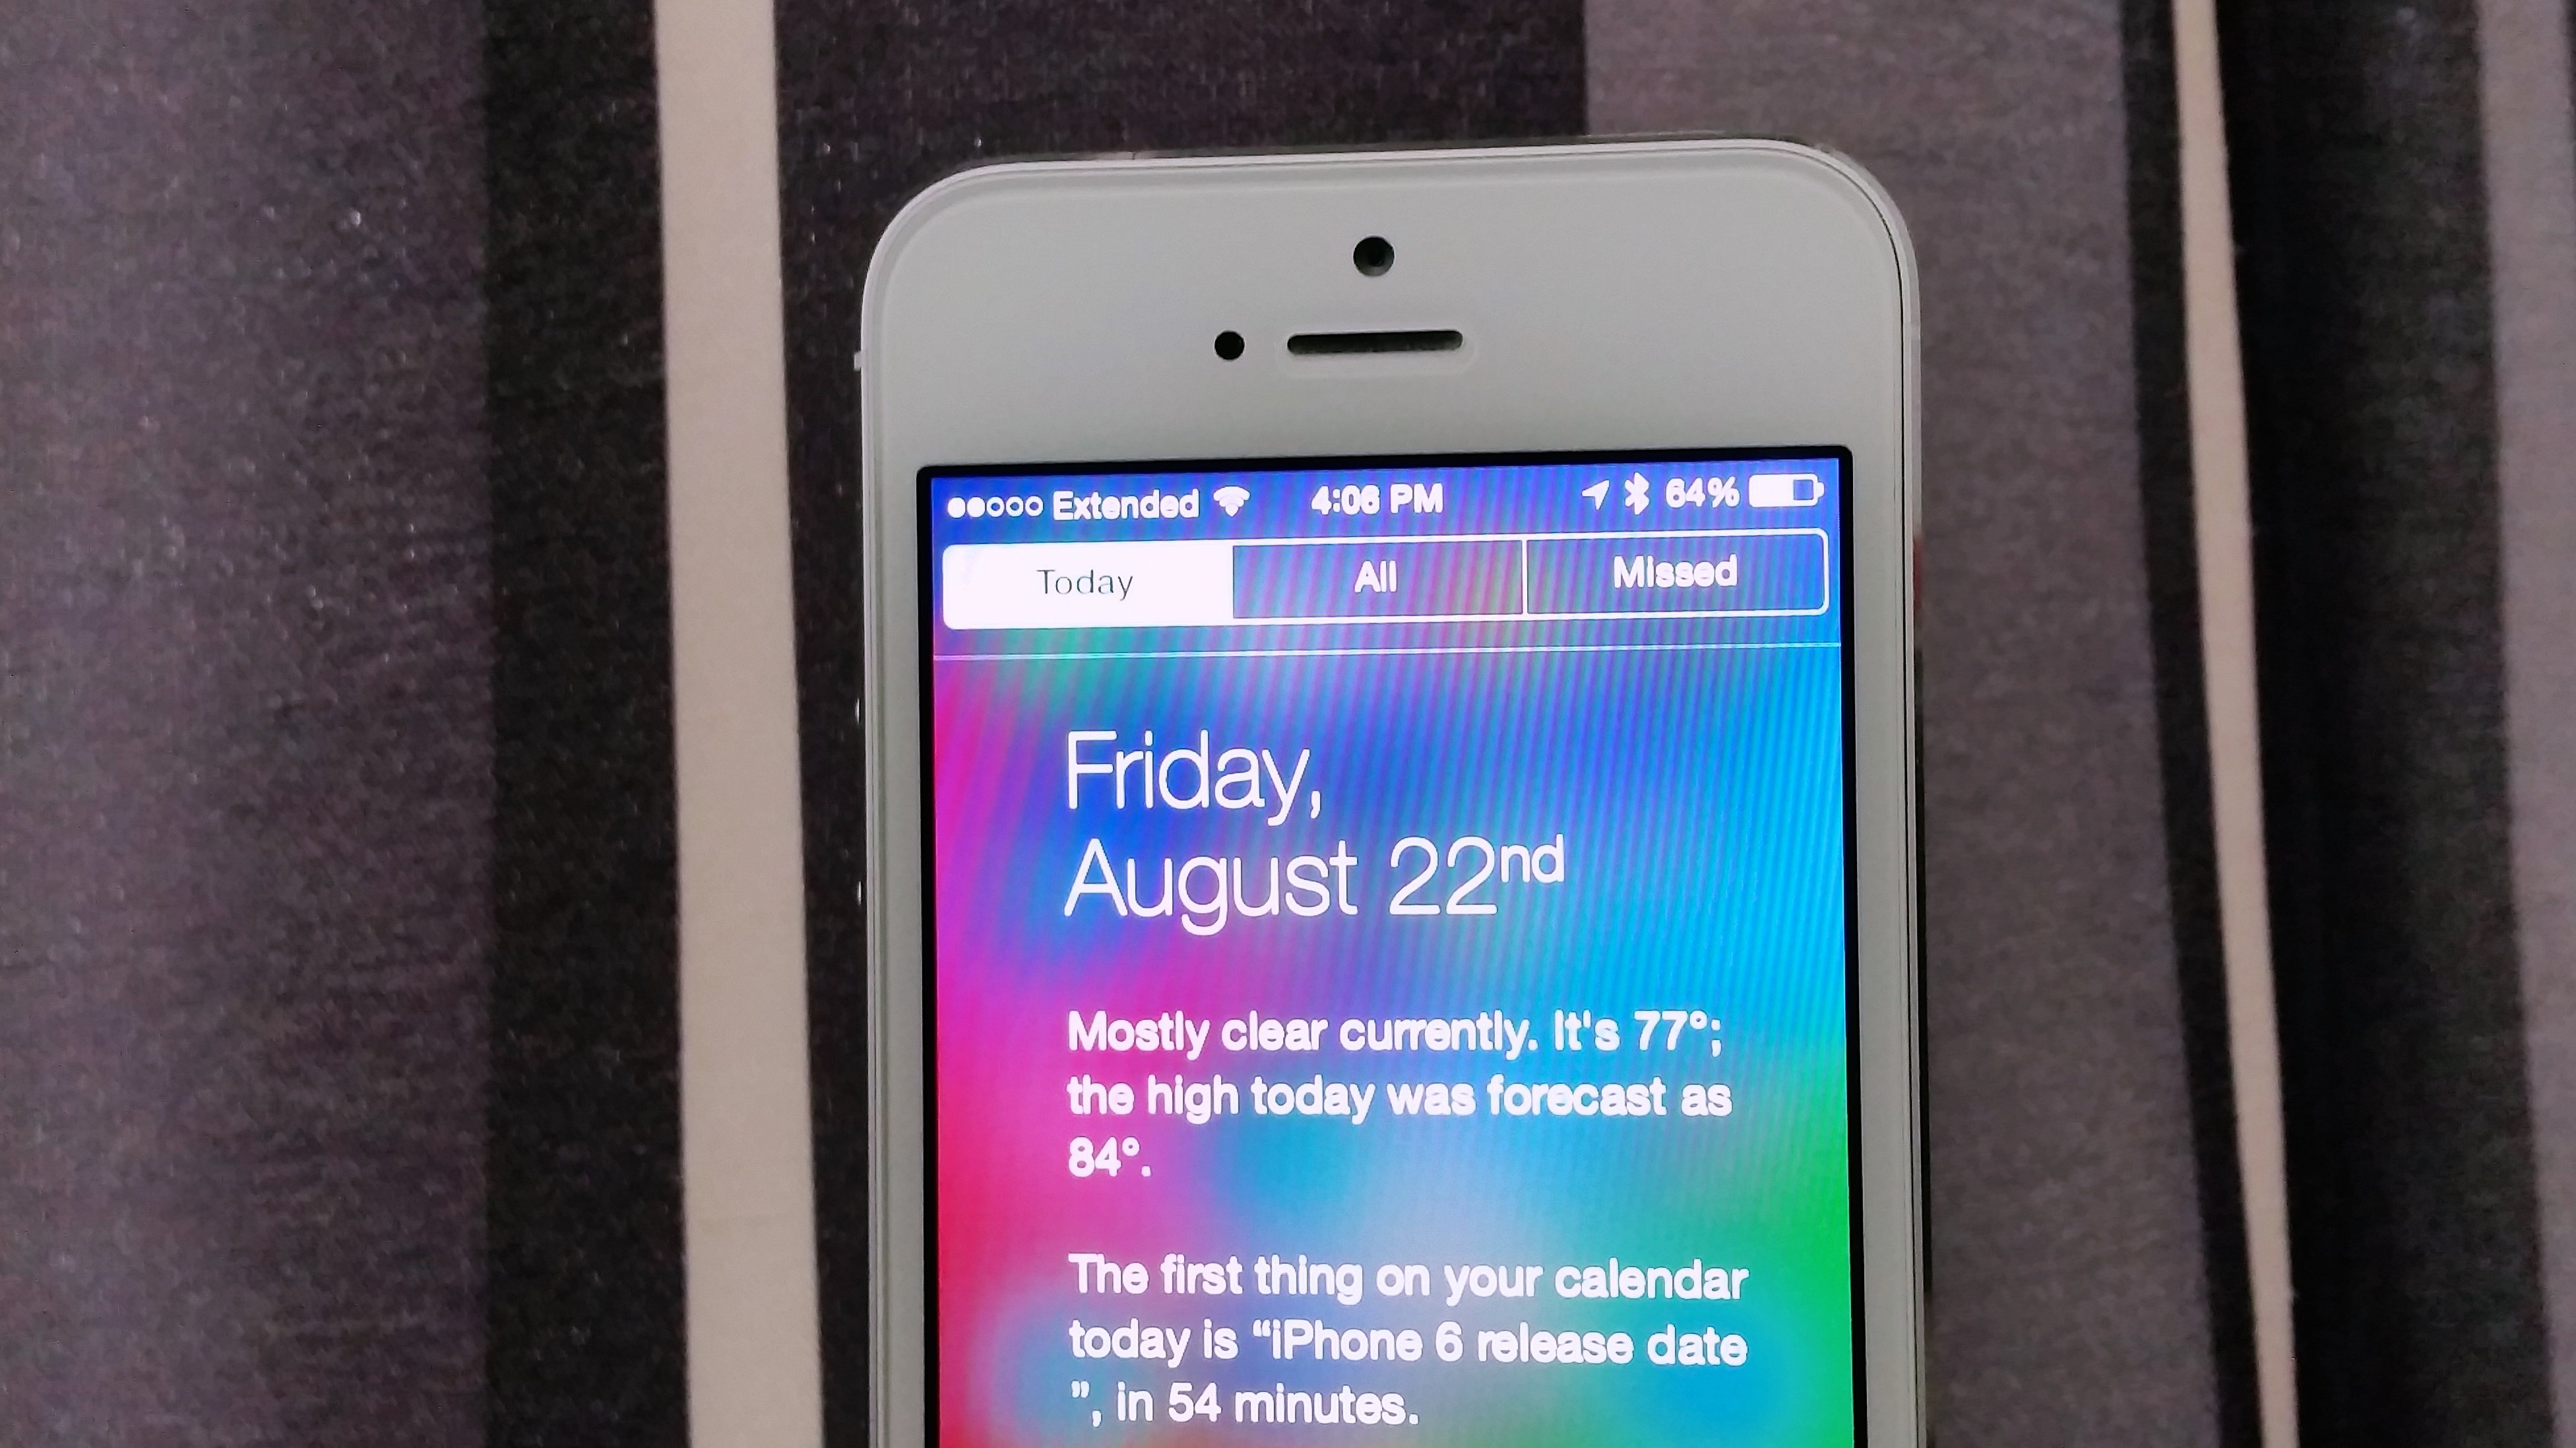 A second rumor points to an iPhone 6 release date in August, earlier than many predictions.